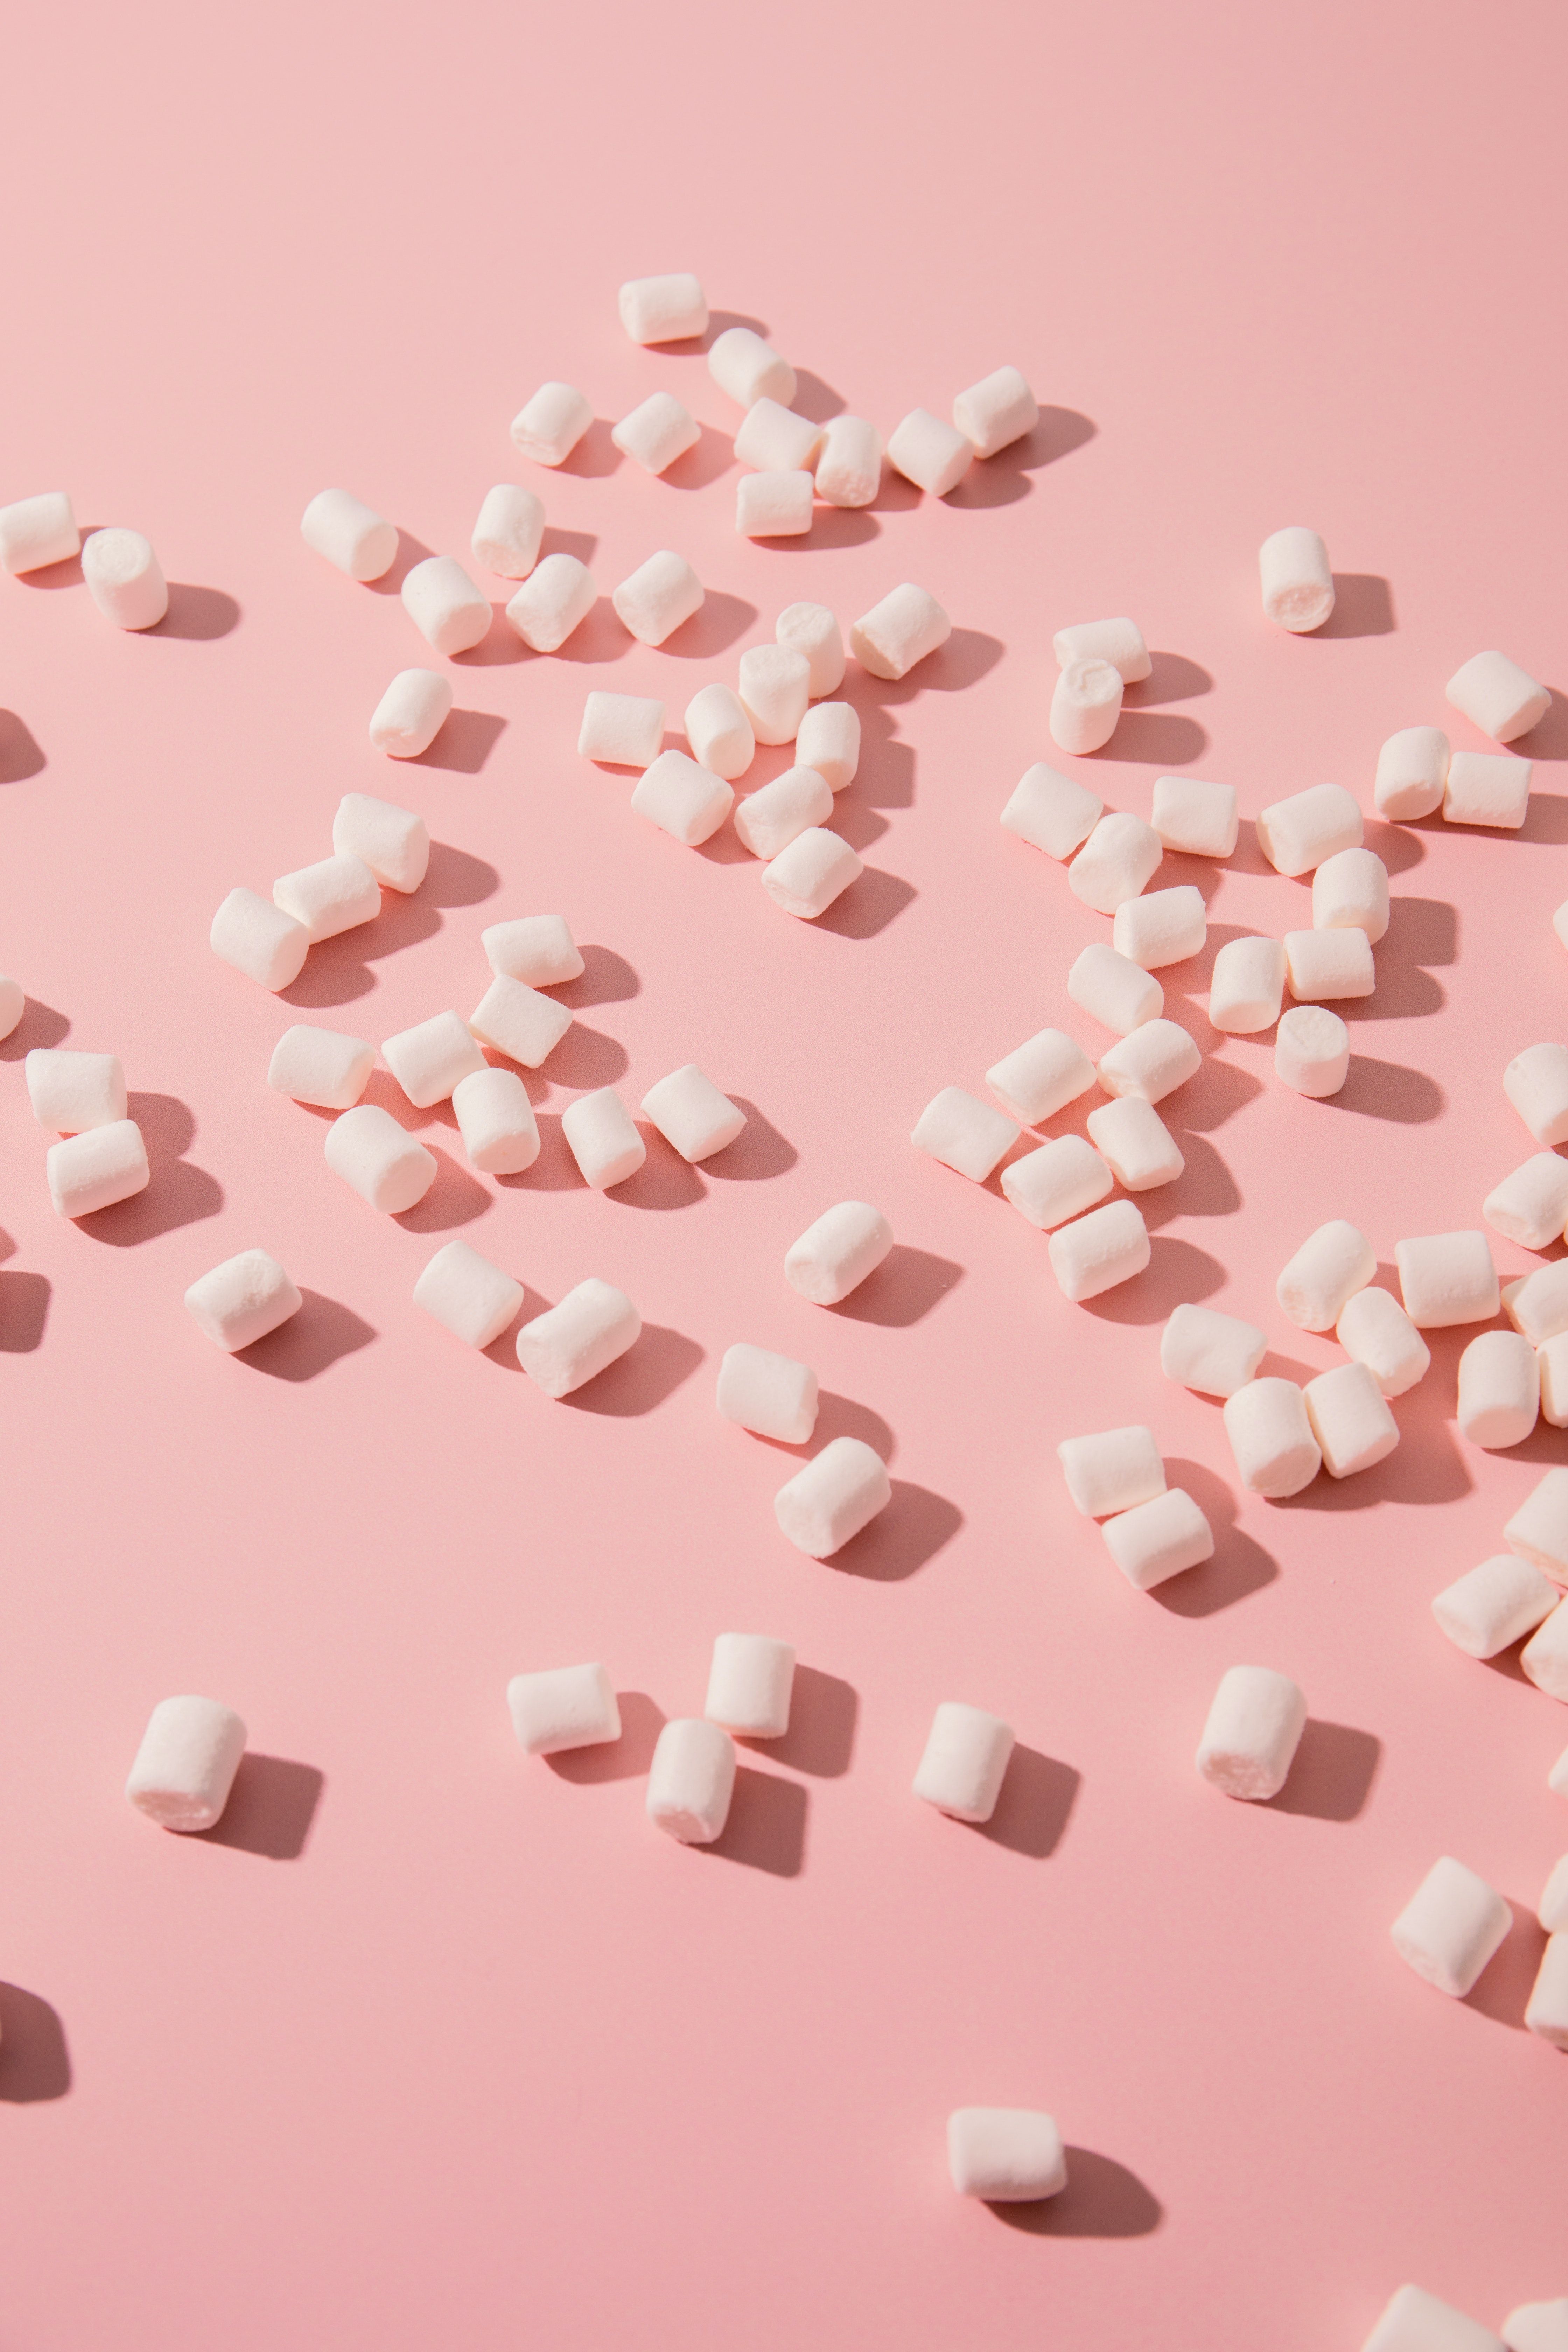 White marshmallows scattered on a pink background - Marshmallows